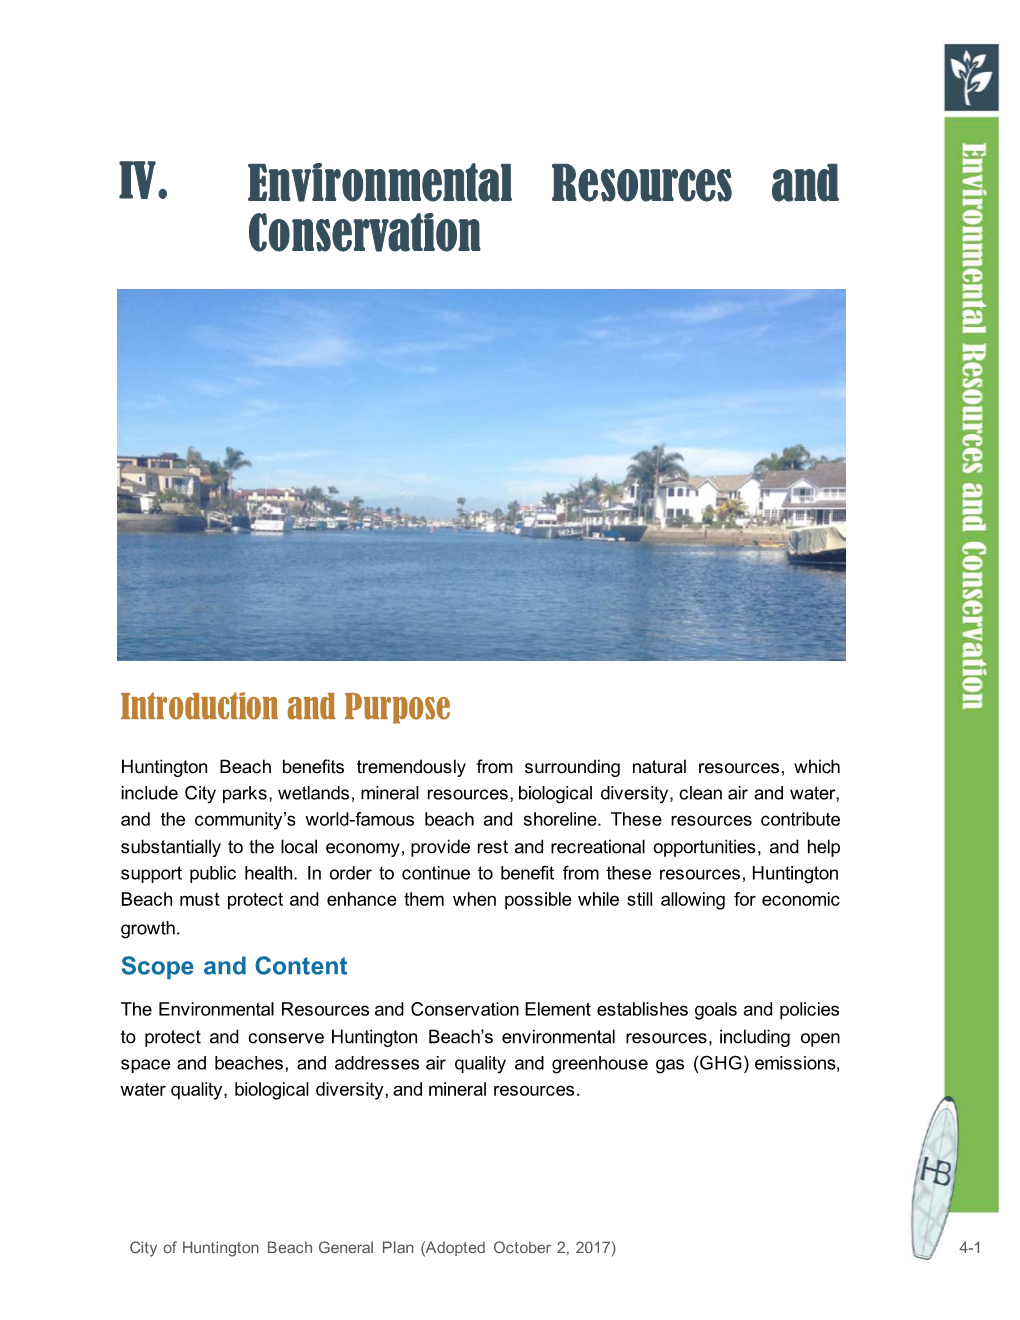 Environmental Resources and Conservation